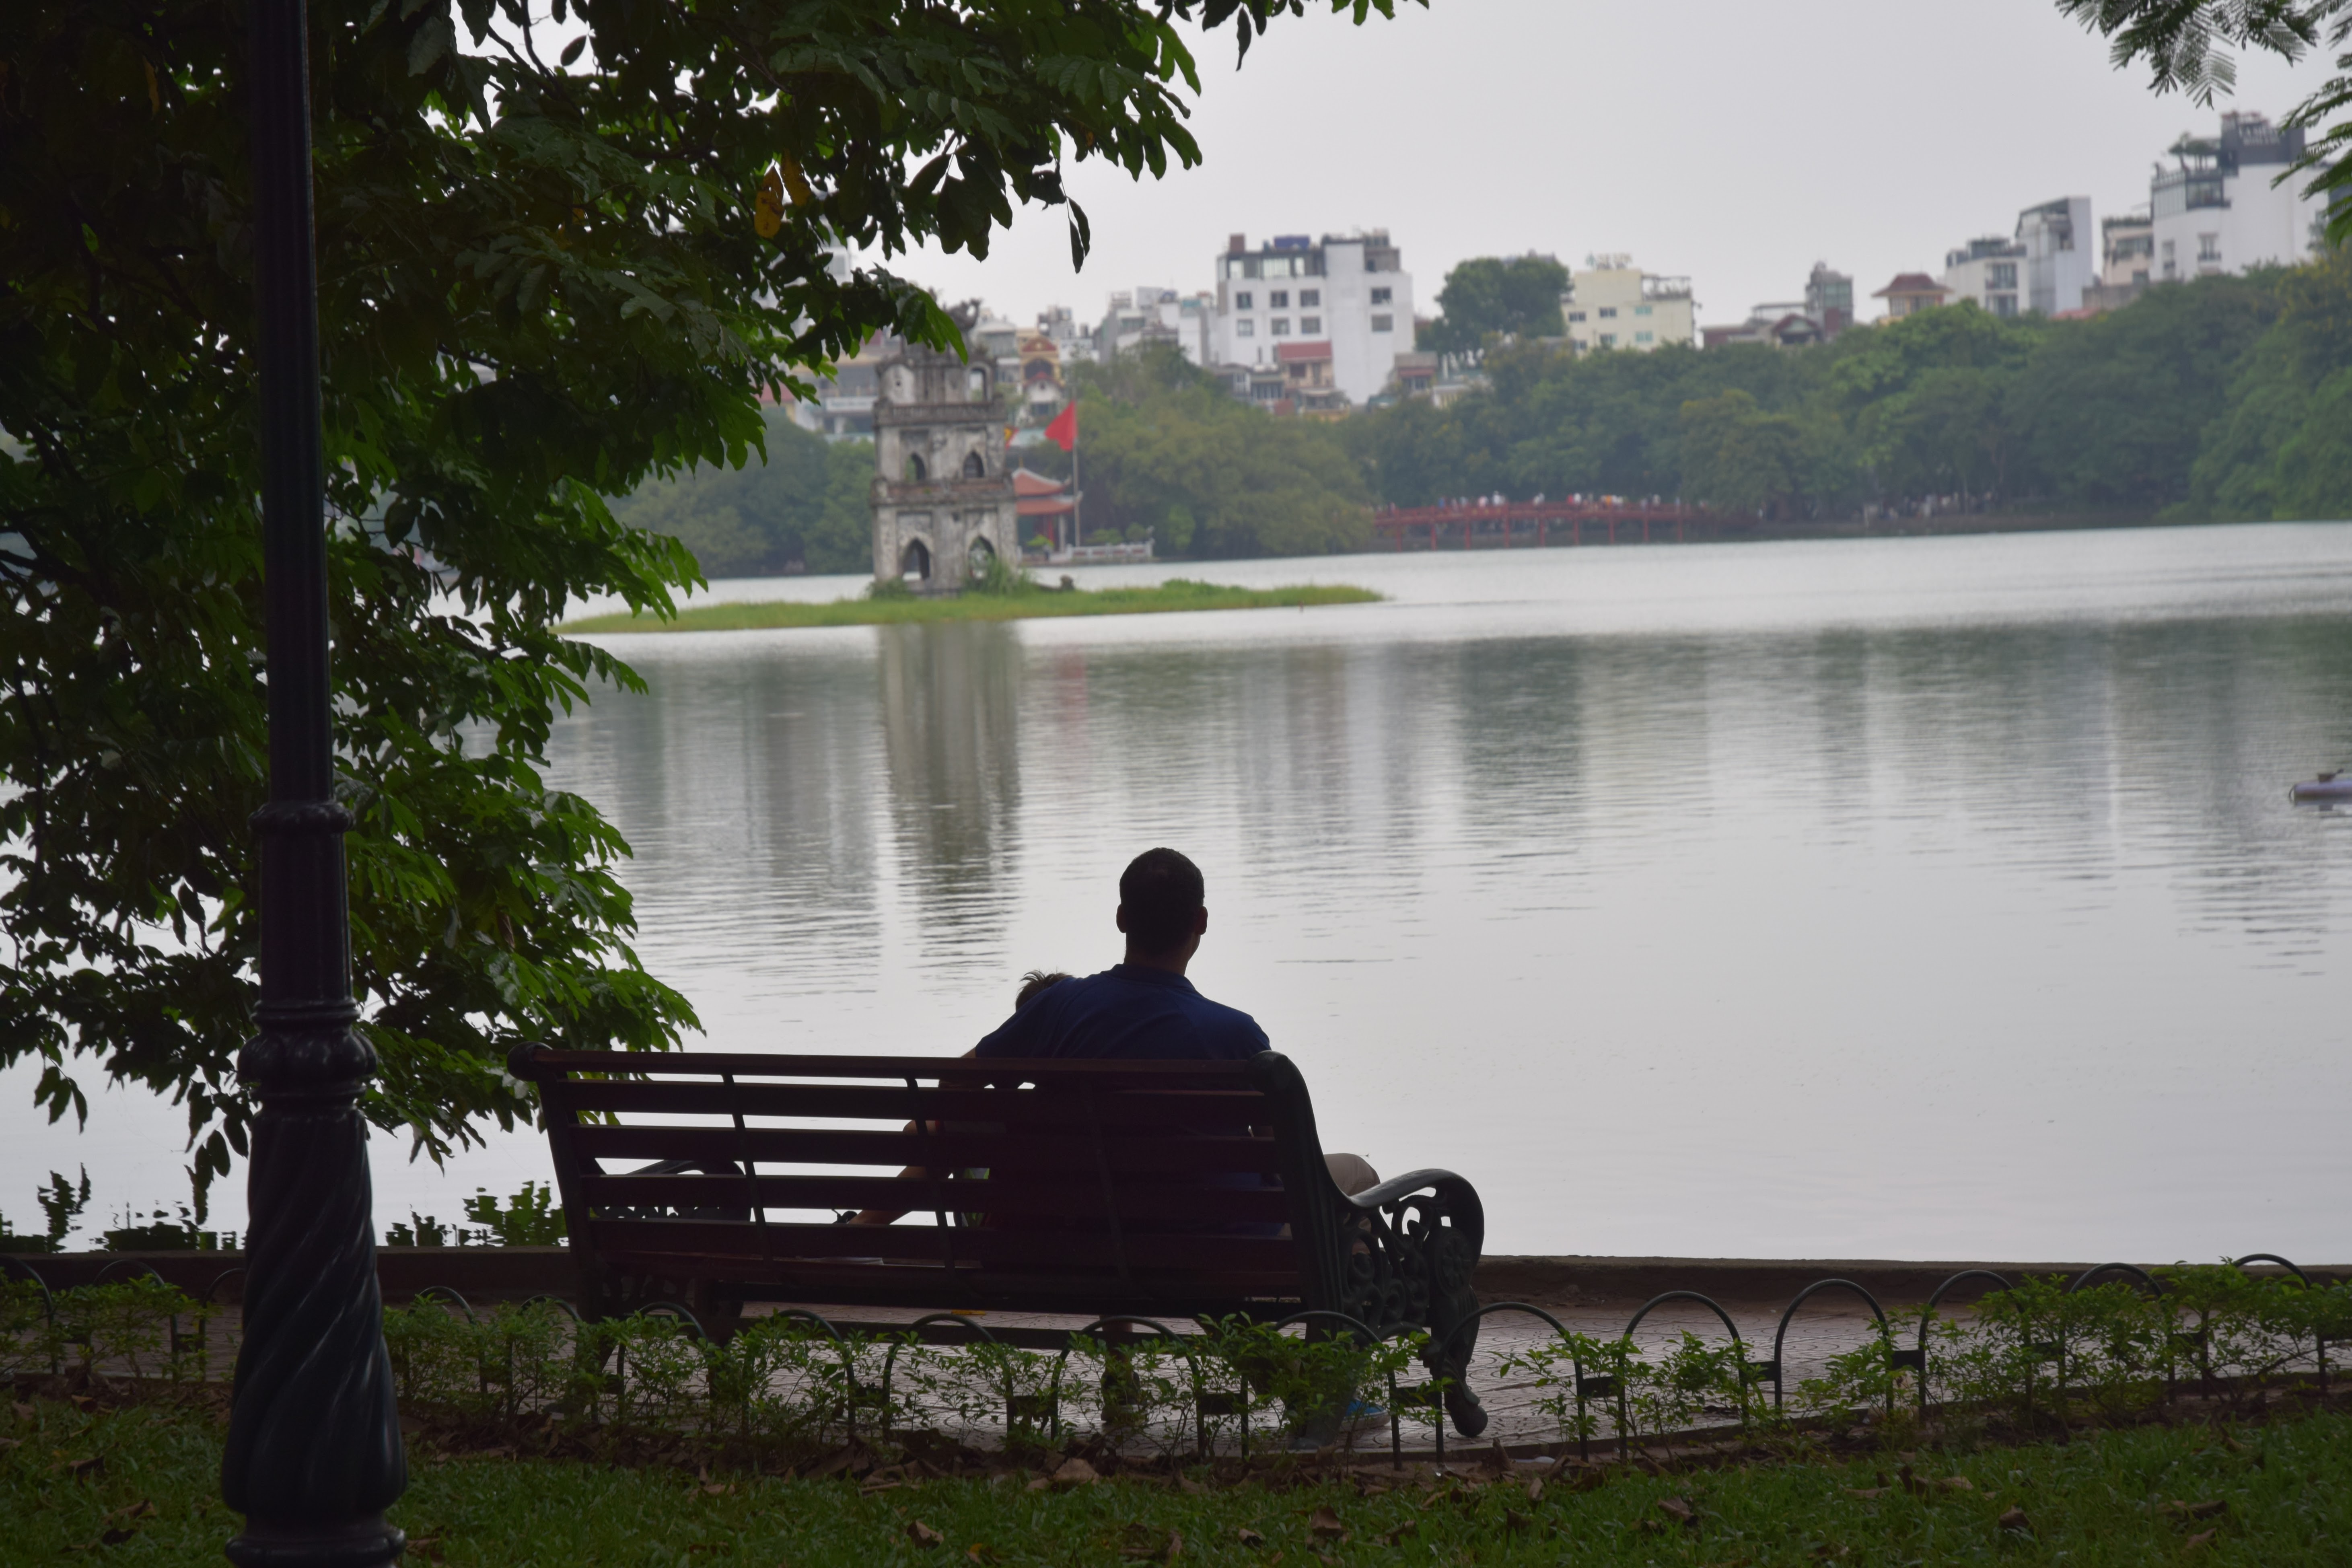 Kyle Nunas and his son at Hoan Kiem Lake in 2018 in a photo provided to Tuoi Tre News. 'I took a photo of a stranger from nearly this exact spot 20 years ago, Nunas wrote a caption for this photo.